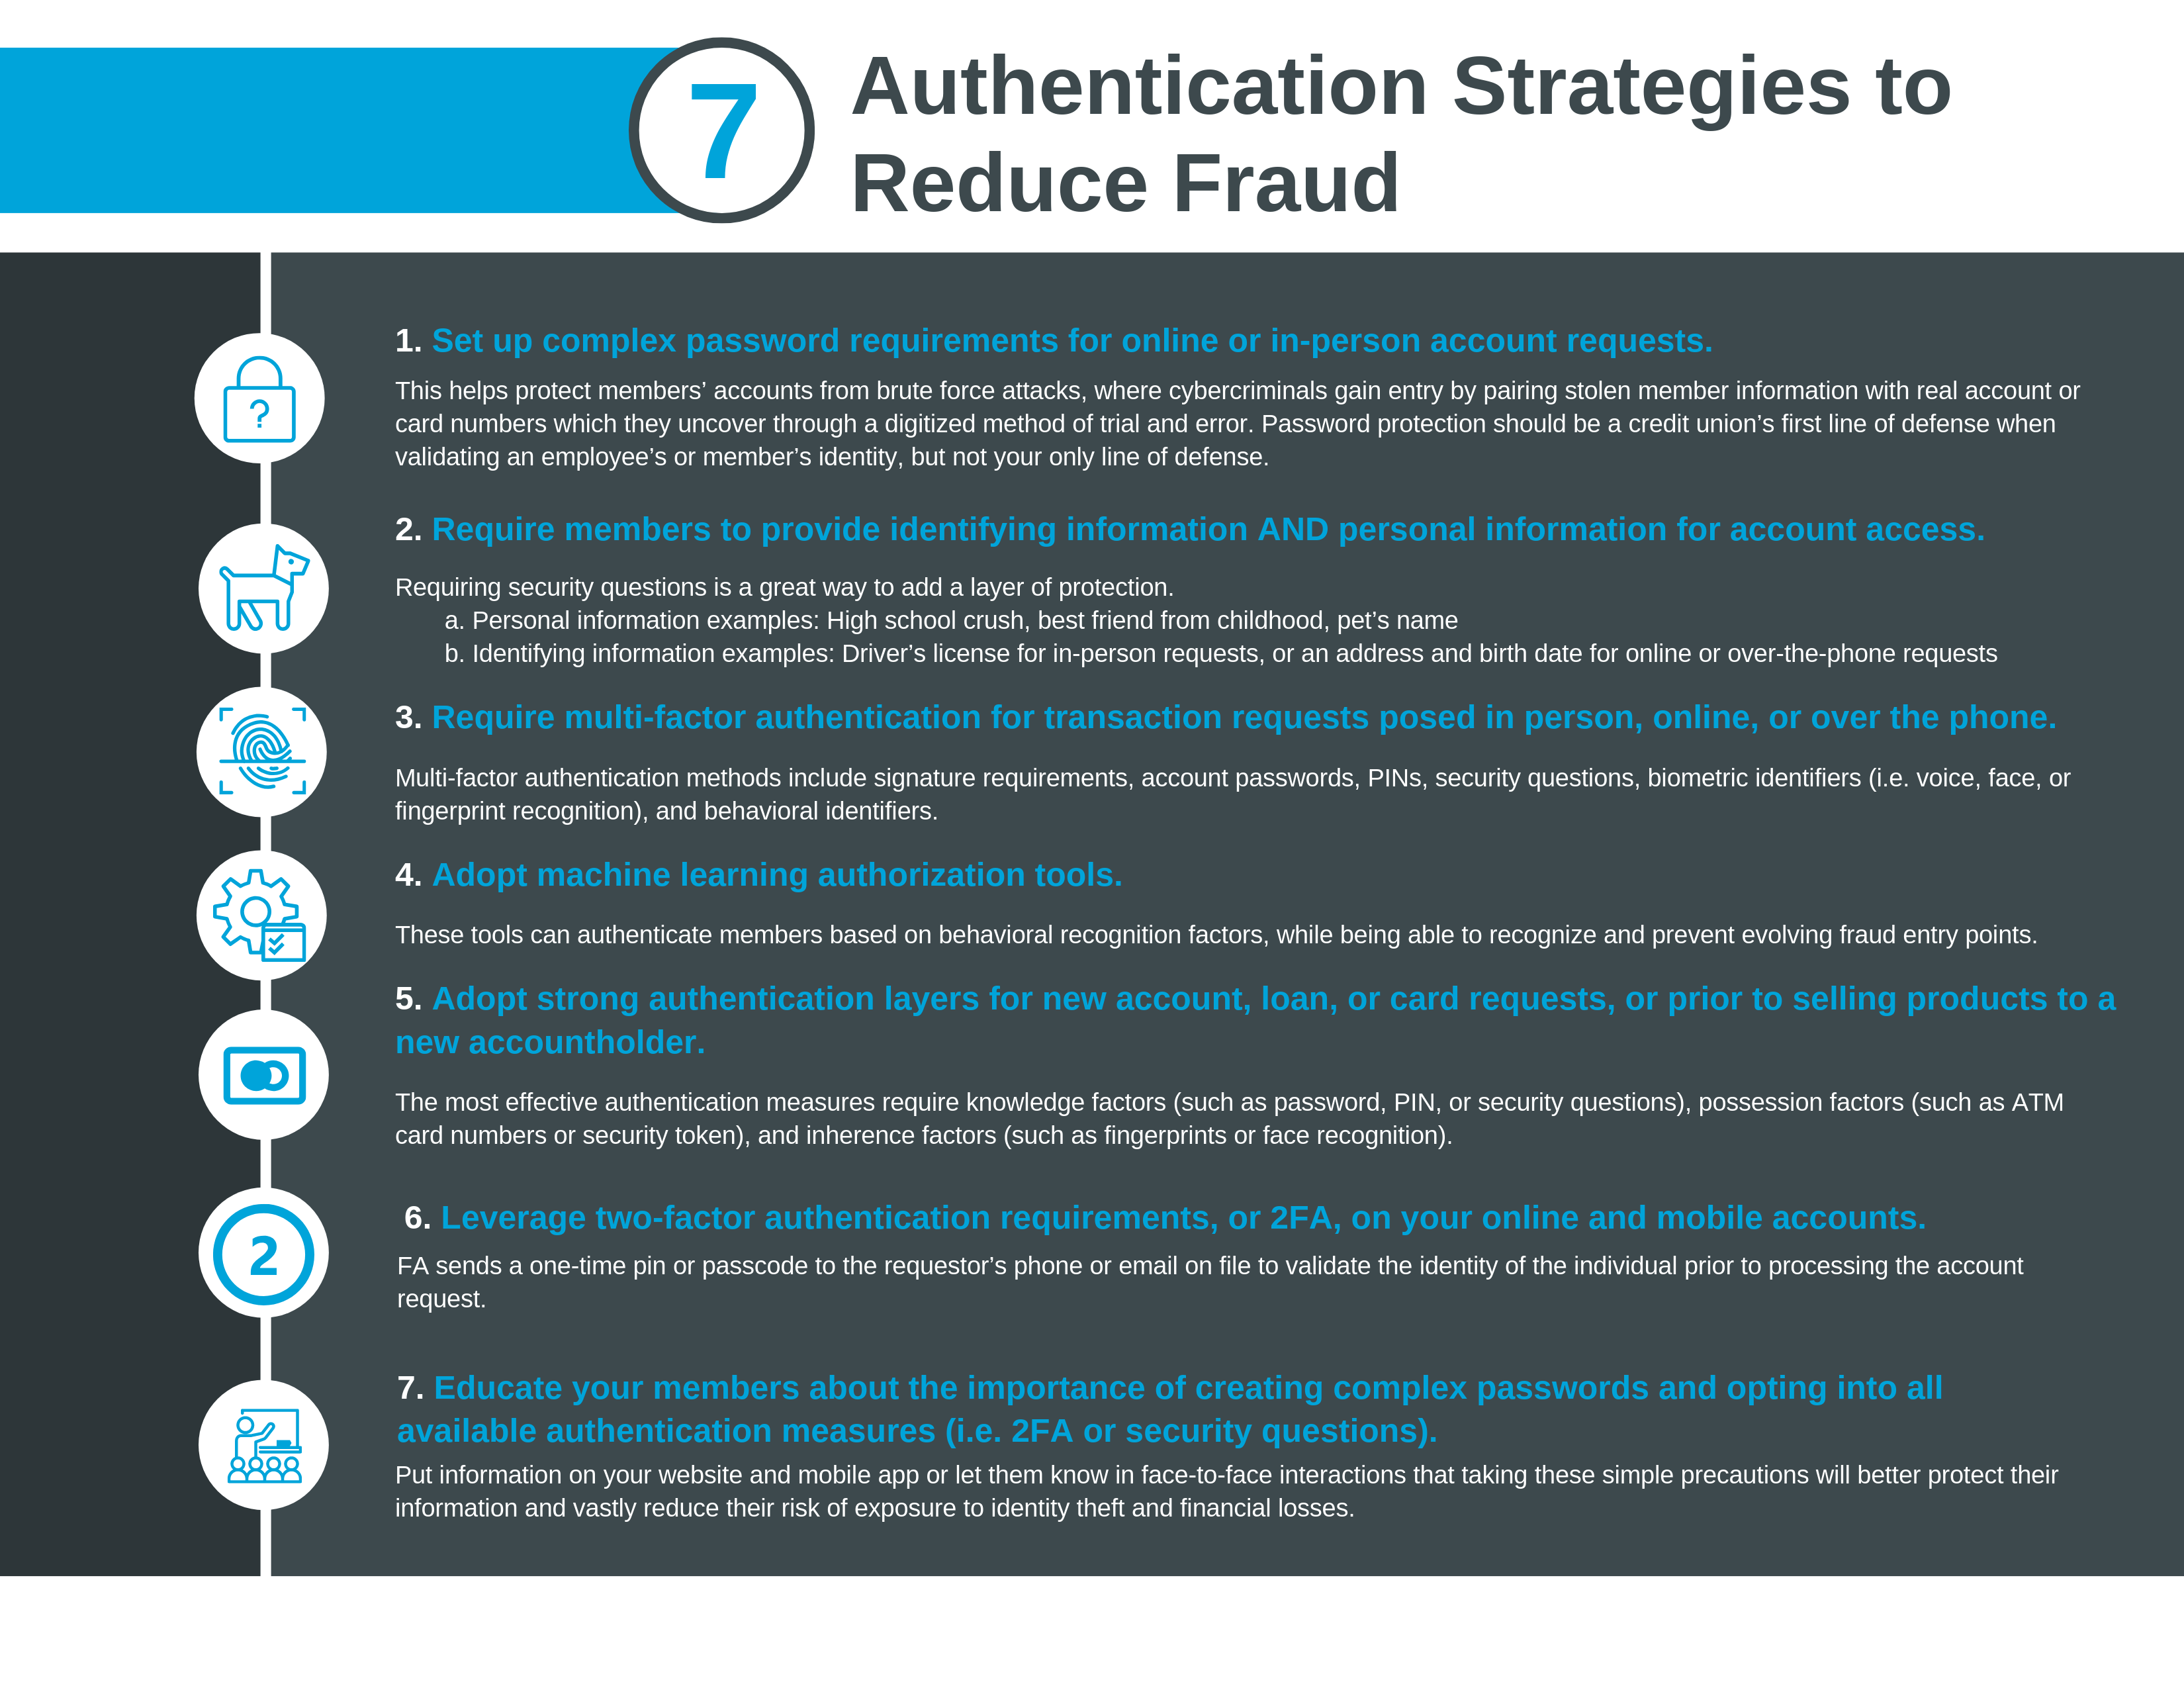 7 Authentication Strategies to Reduce Fraud